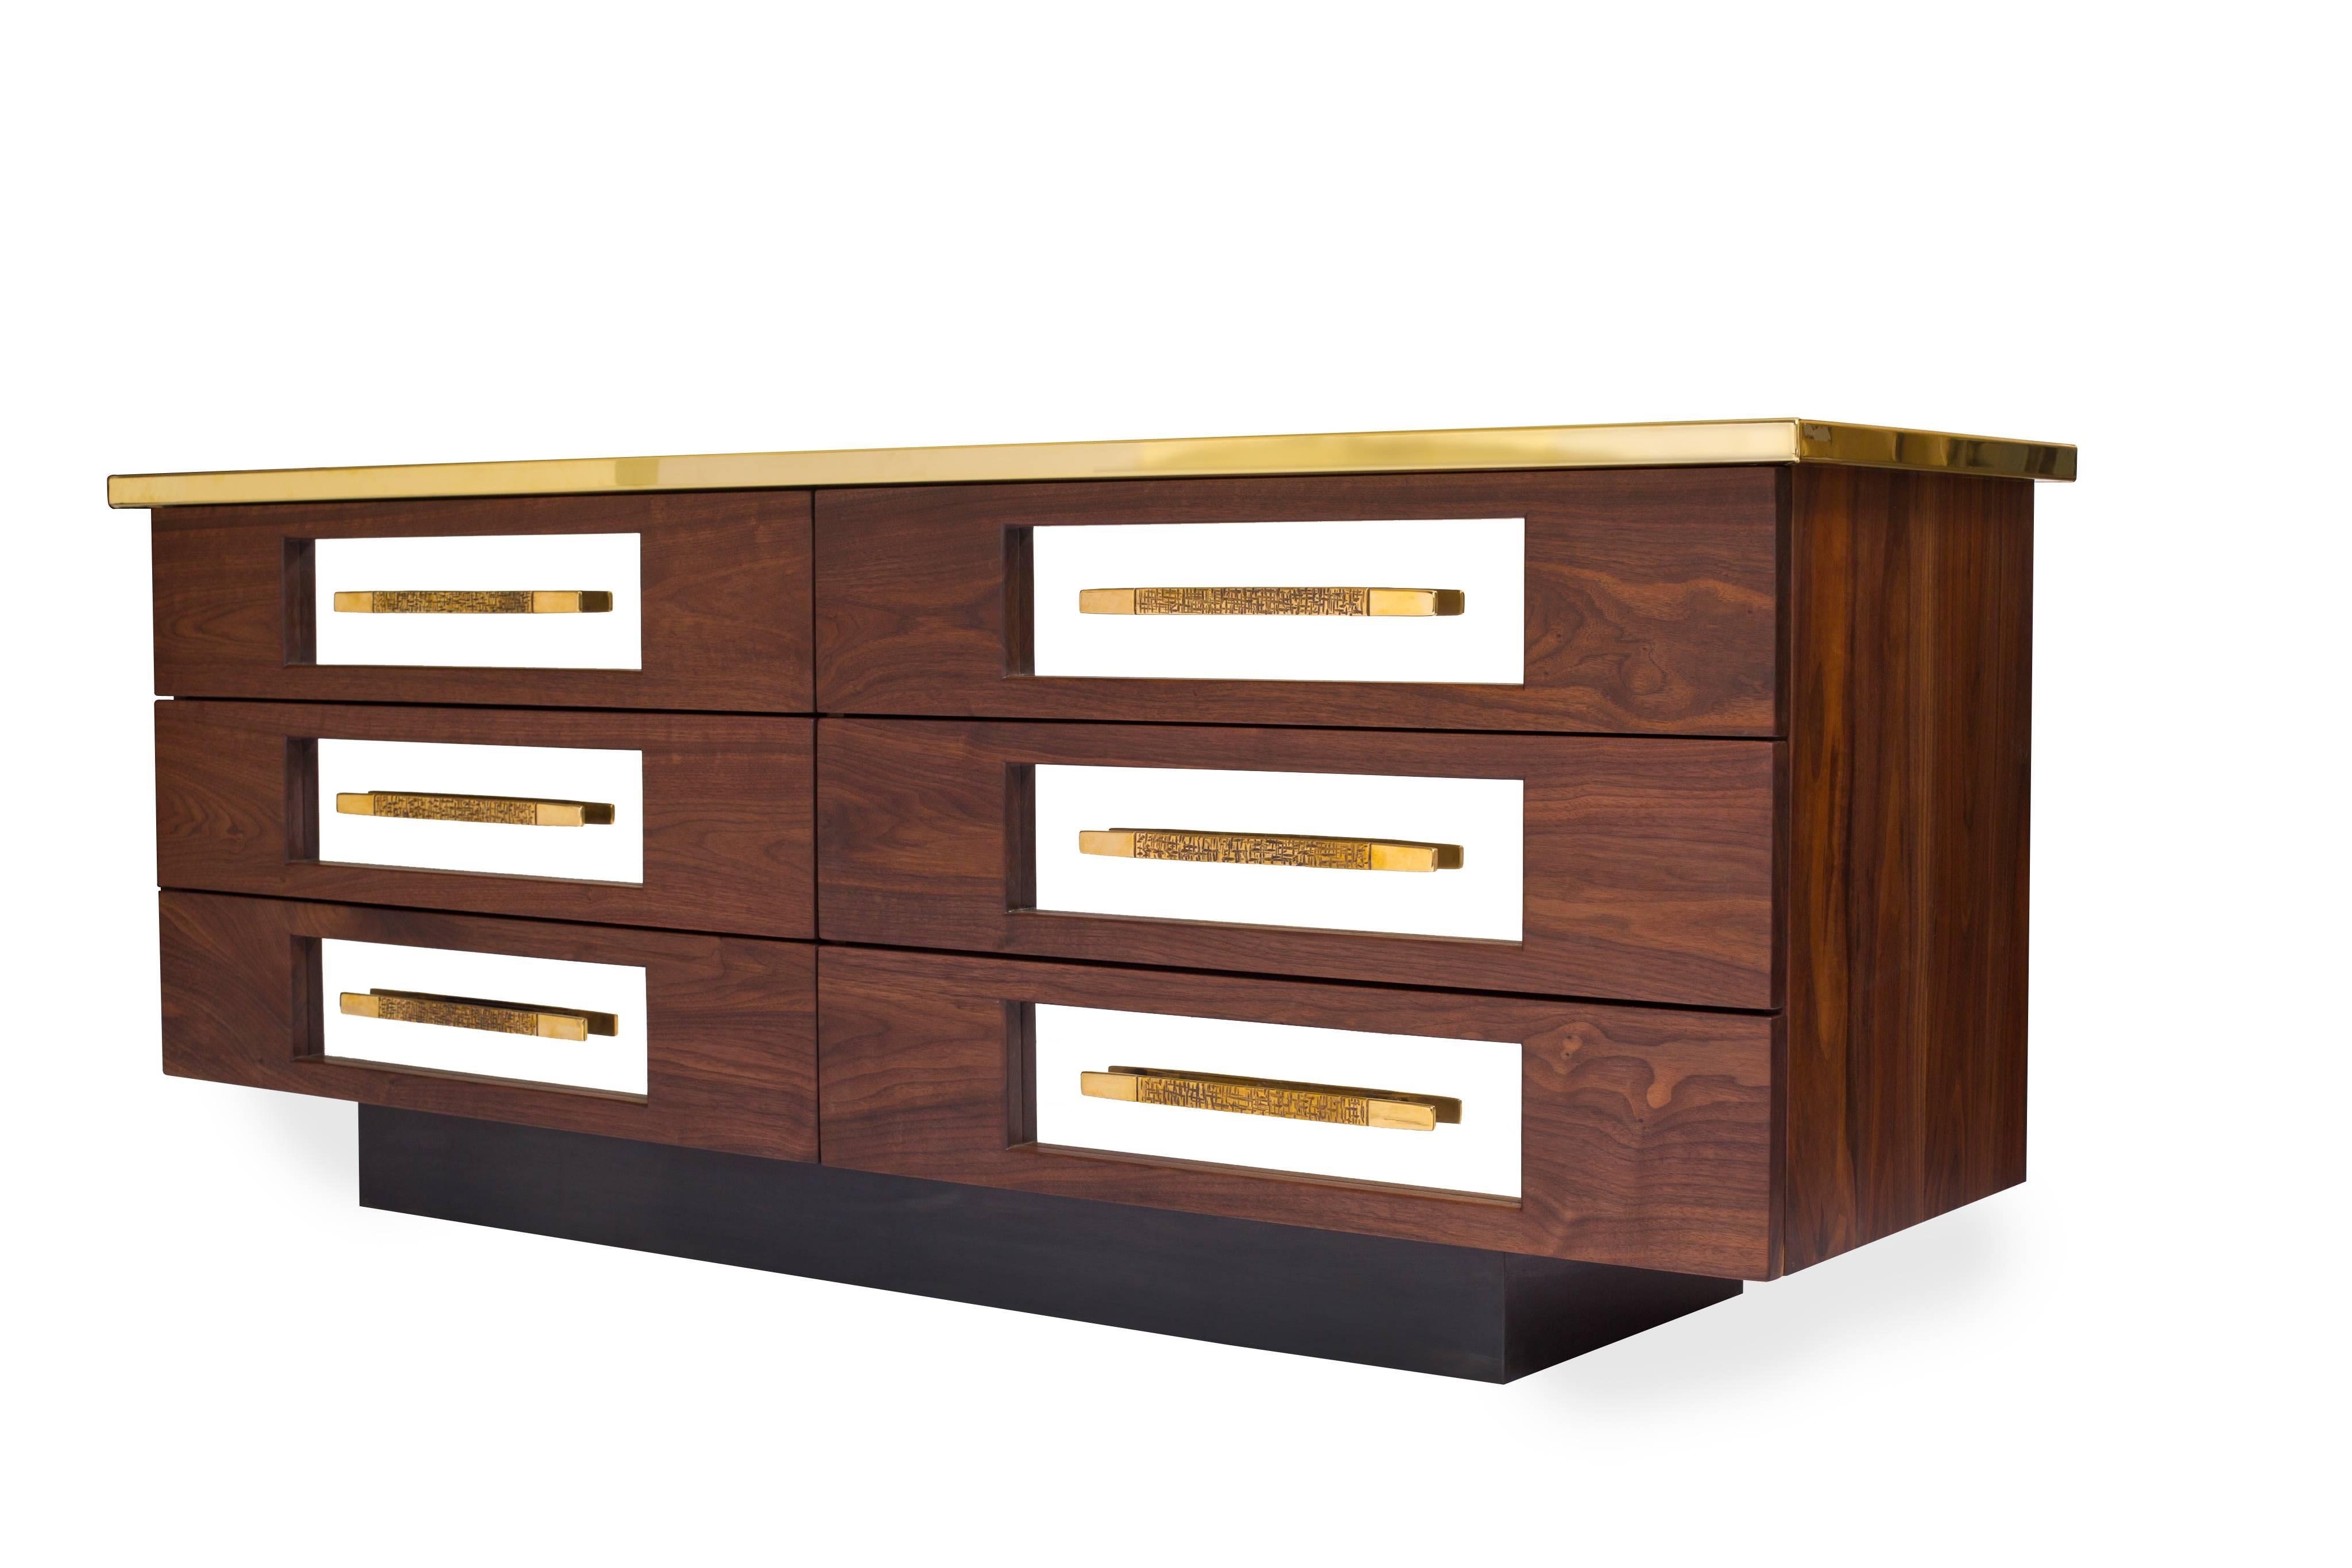 Called the " Trophy Sideboard " 

All black walnut hardwood construction with mirror-finish brass top. Also features mirrored stainless steel drawer fronts and hand-forged brass pulls. Blackened steel base.

Bret Cavanaugh is a modern